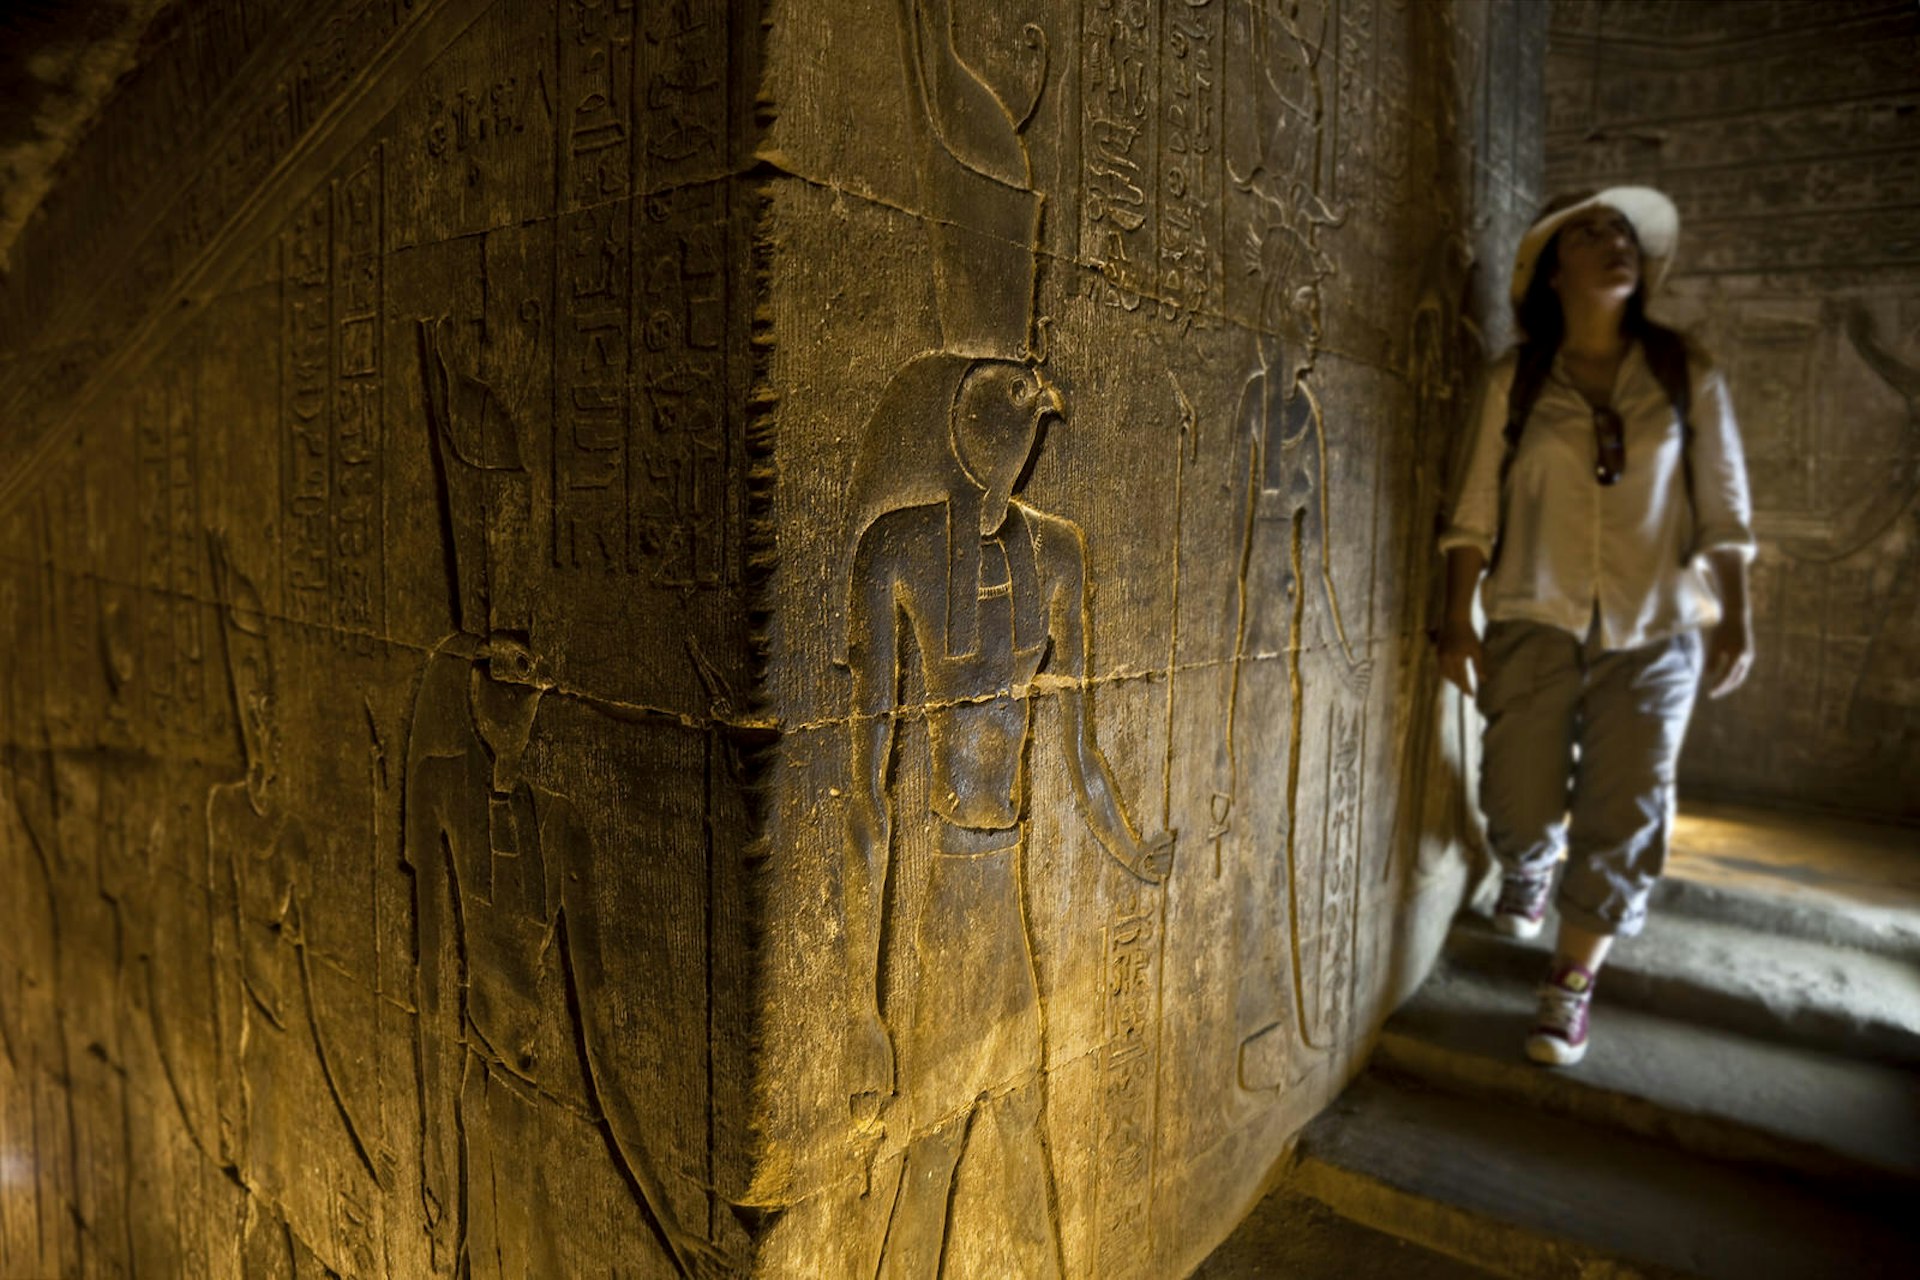 Woman in temple looking at hieroglyphics and Horus at Edfu temple. Image by ugurhan / Getty Images